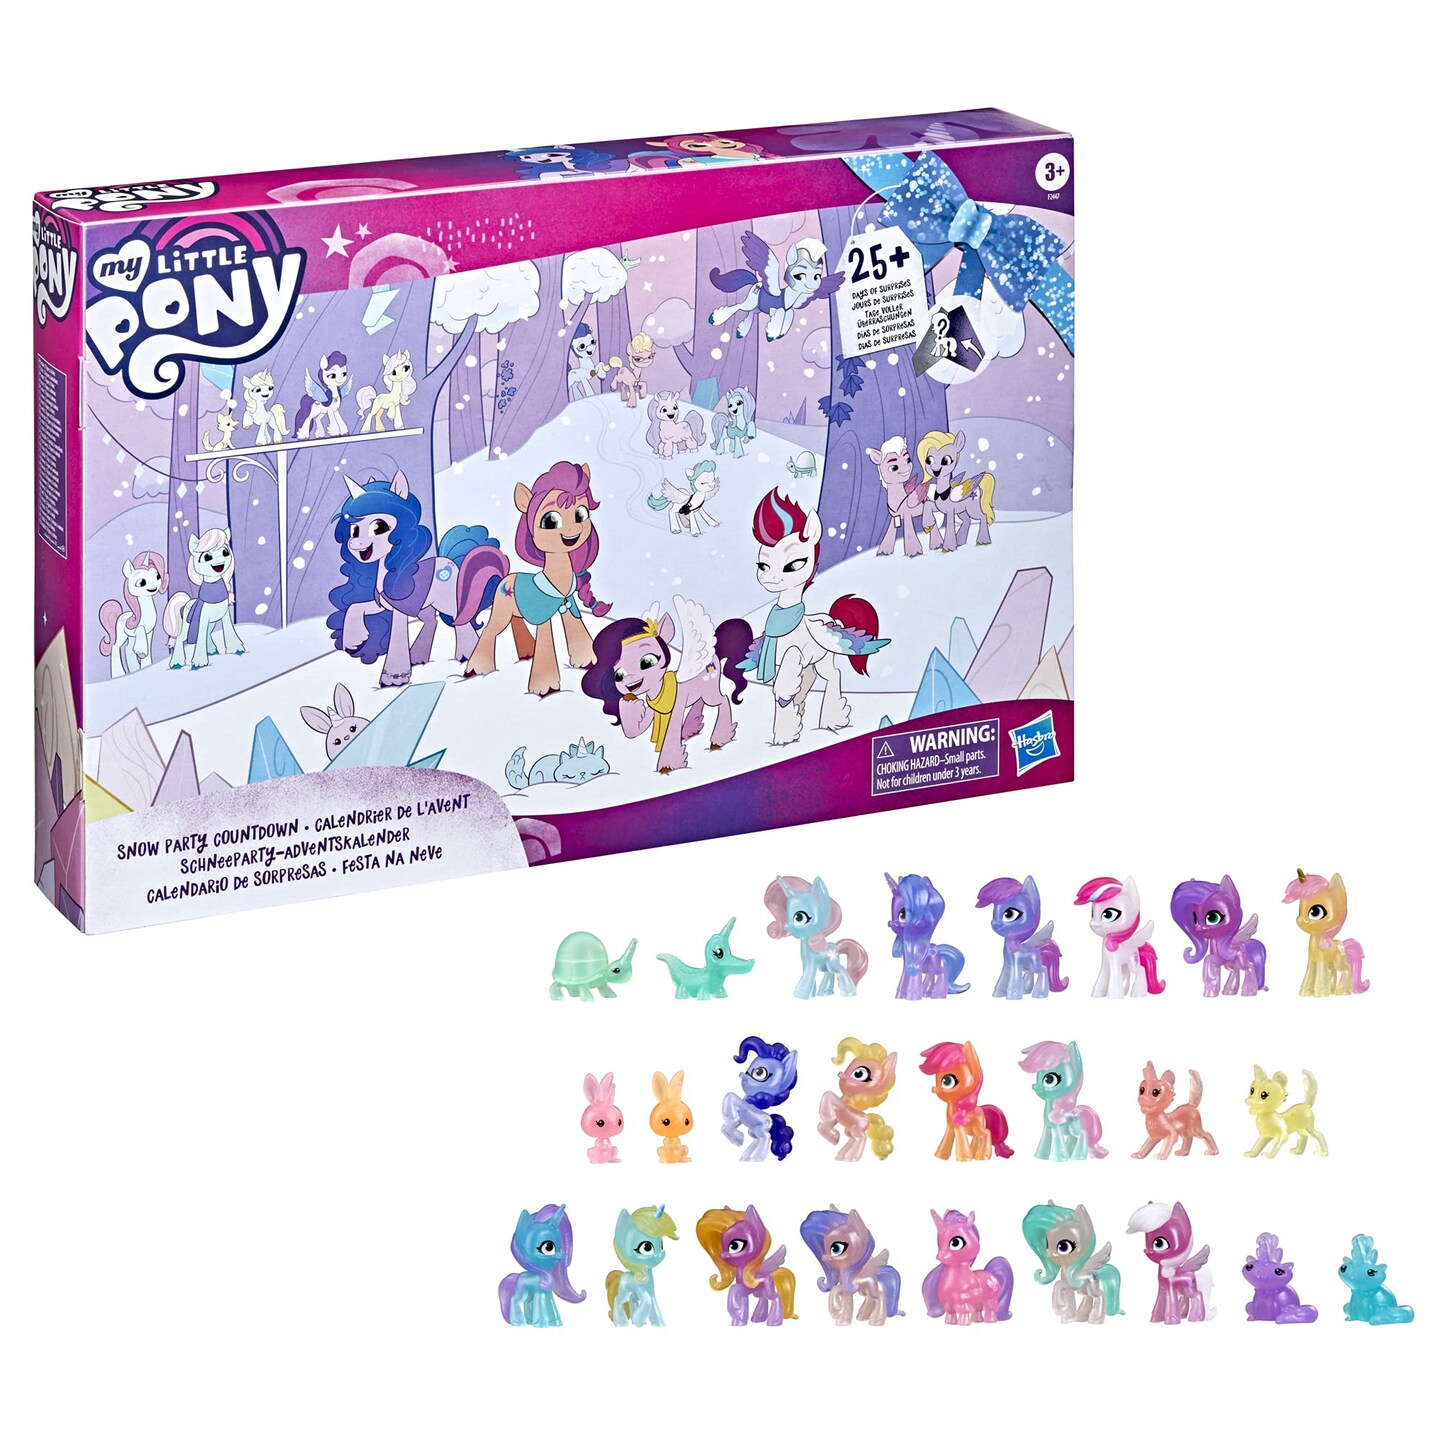 My Little Pony: A New Generation Movie Snow Party Countdown Advent Calendar Toy for Kids - 25 Surprise Pieces, Including 16 Pony Figures (Exclusive)